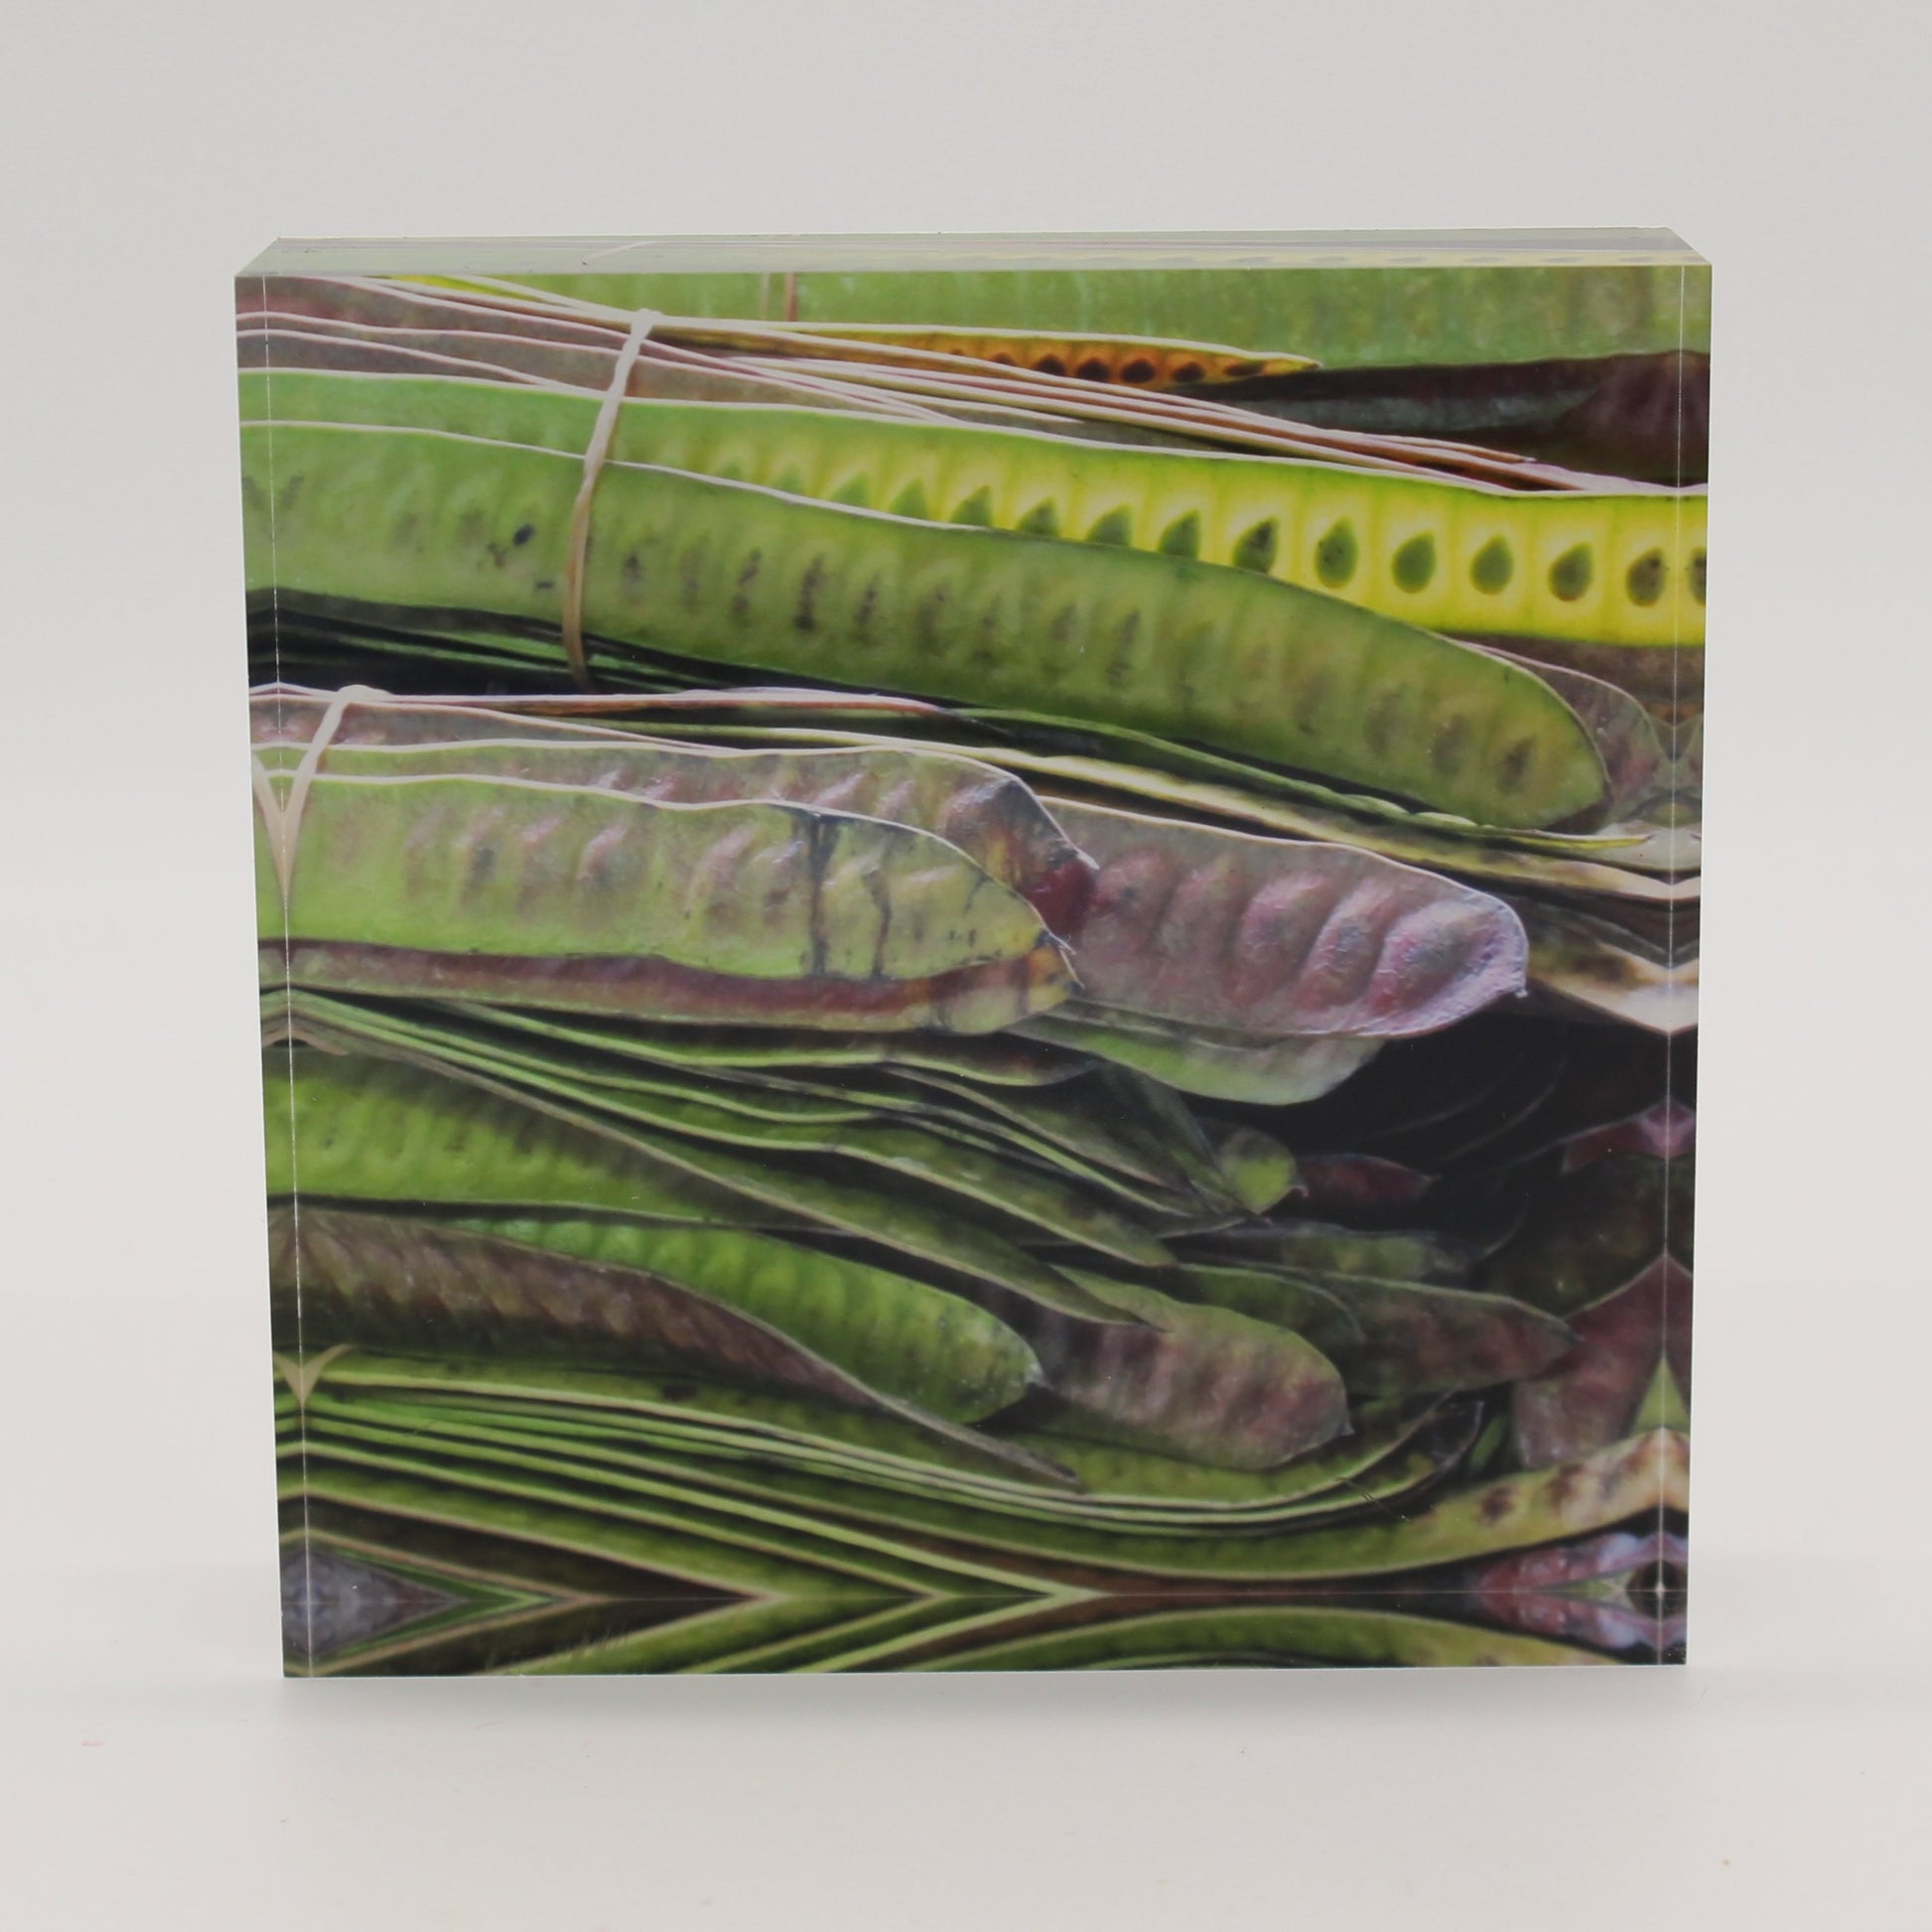 Acrylic block picture of green bean pods